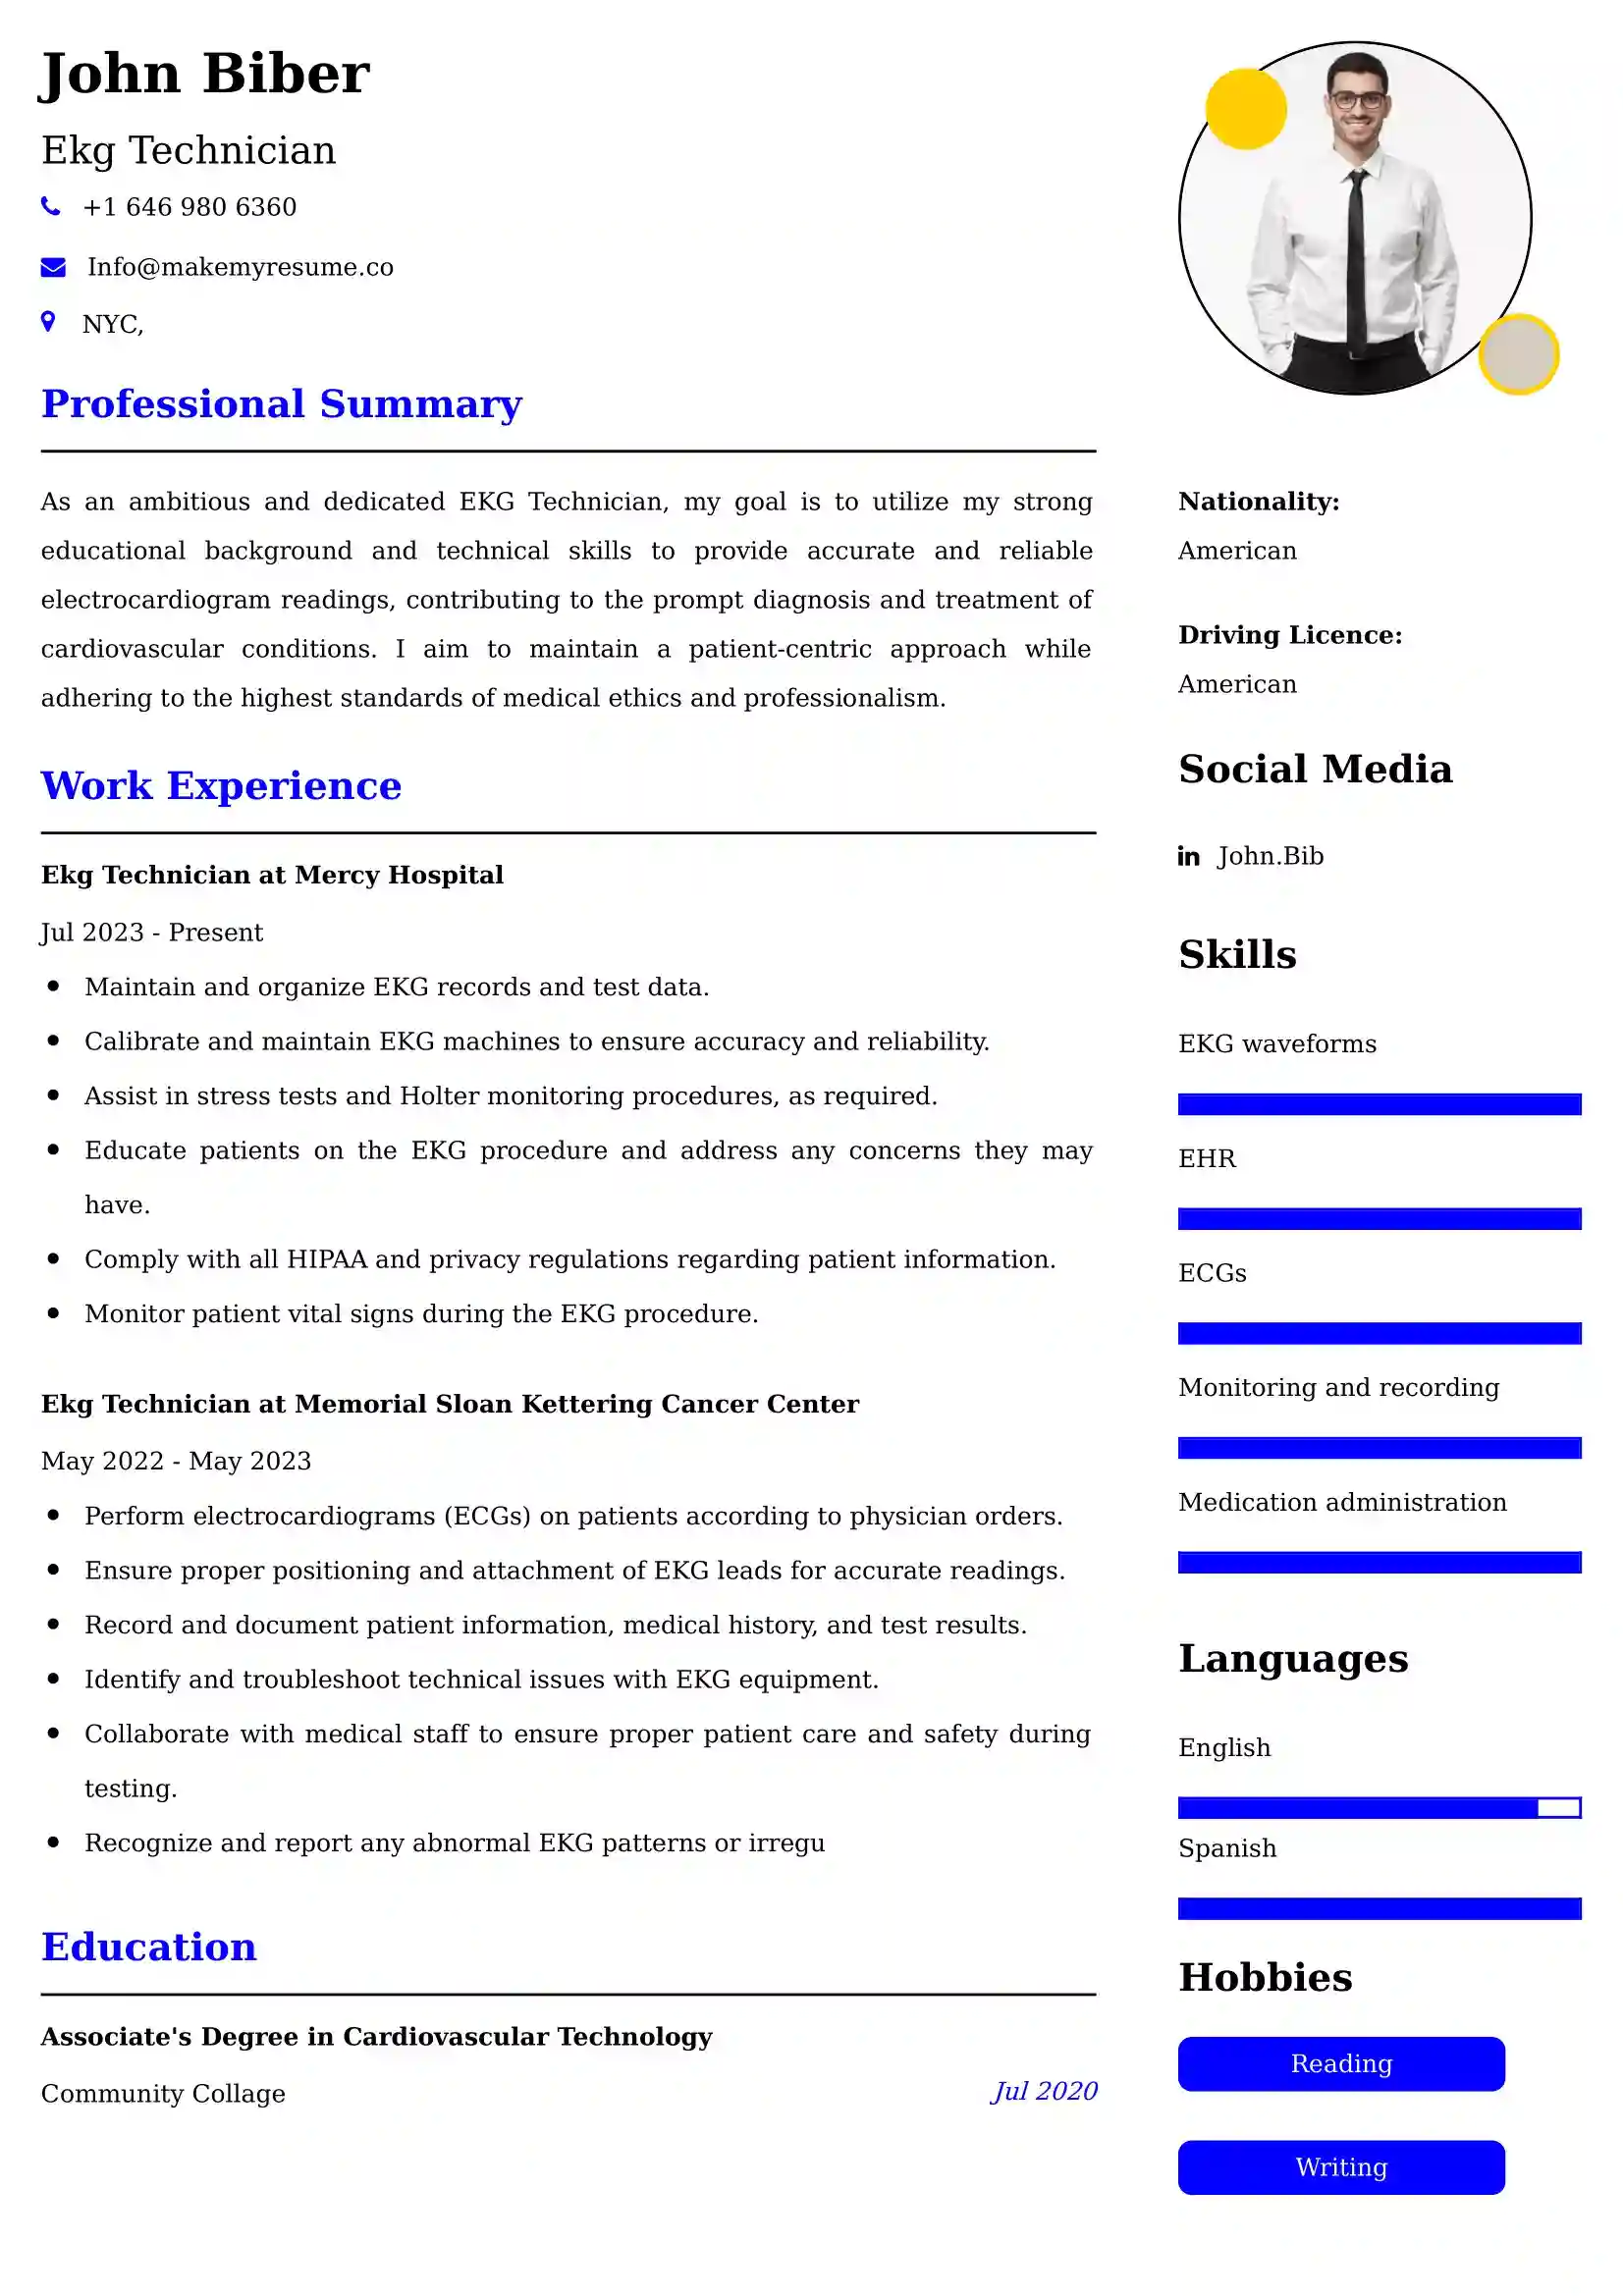 Ekg Technician Resume Examples for UK Jobs - Tips and Guide